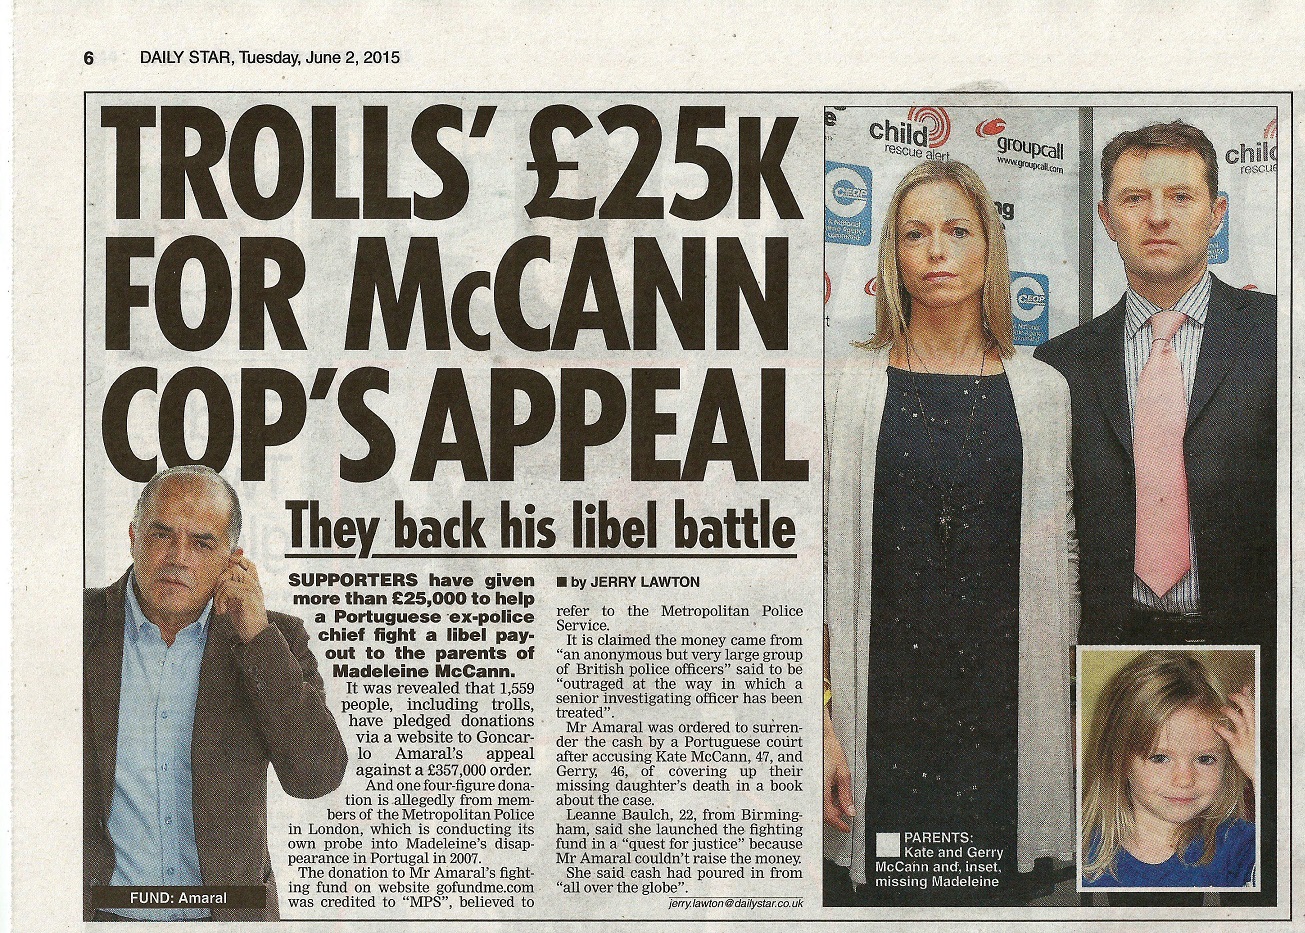 Trolls £25k for McCann cop's appeal - Daily Star (paper edition, page 6)